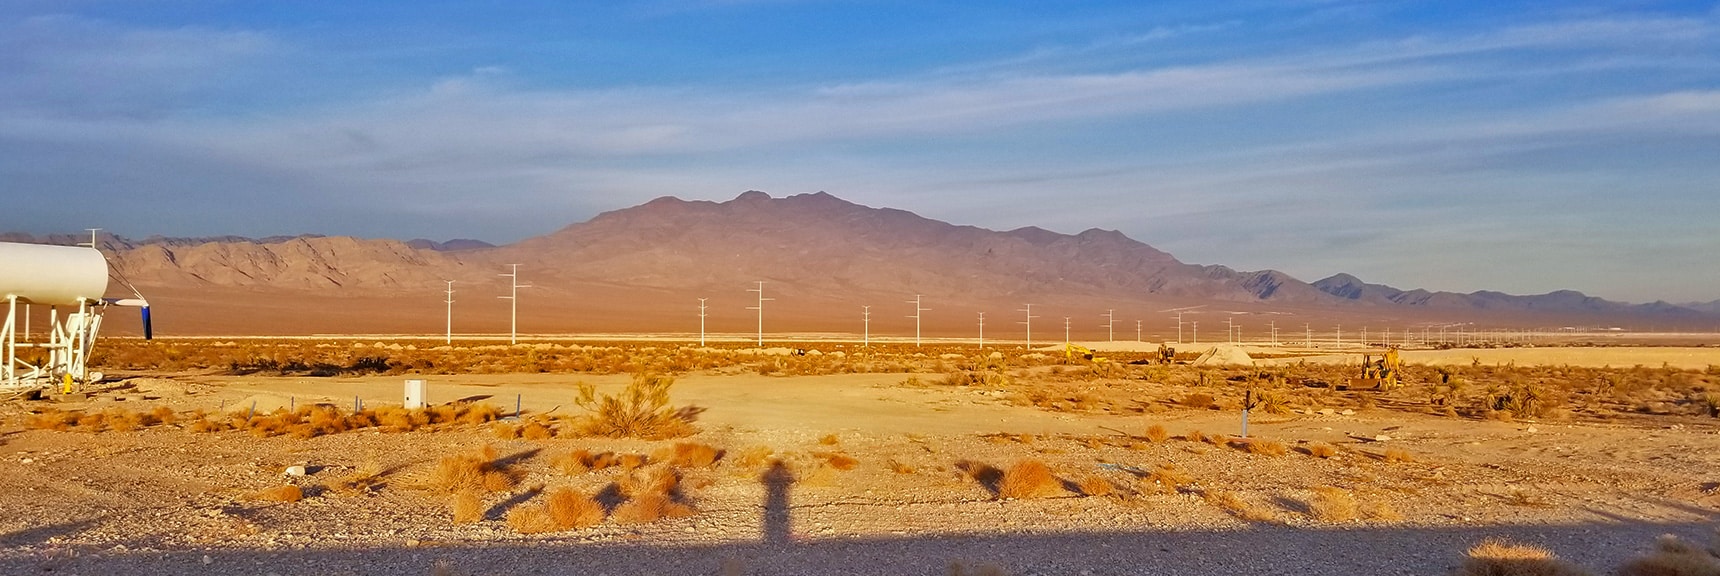 View from Skye Point Dr Toward Gass Peak | Snapshot of Las Vegas Northern Growth Edge on January 3, 2021